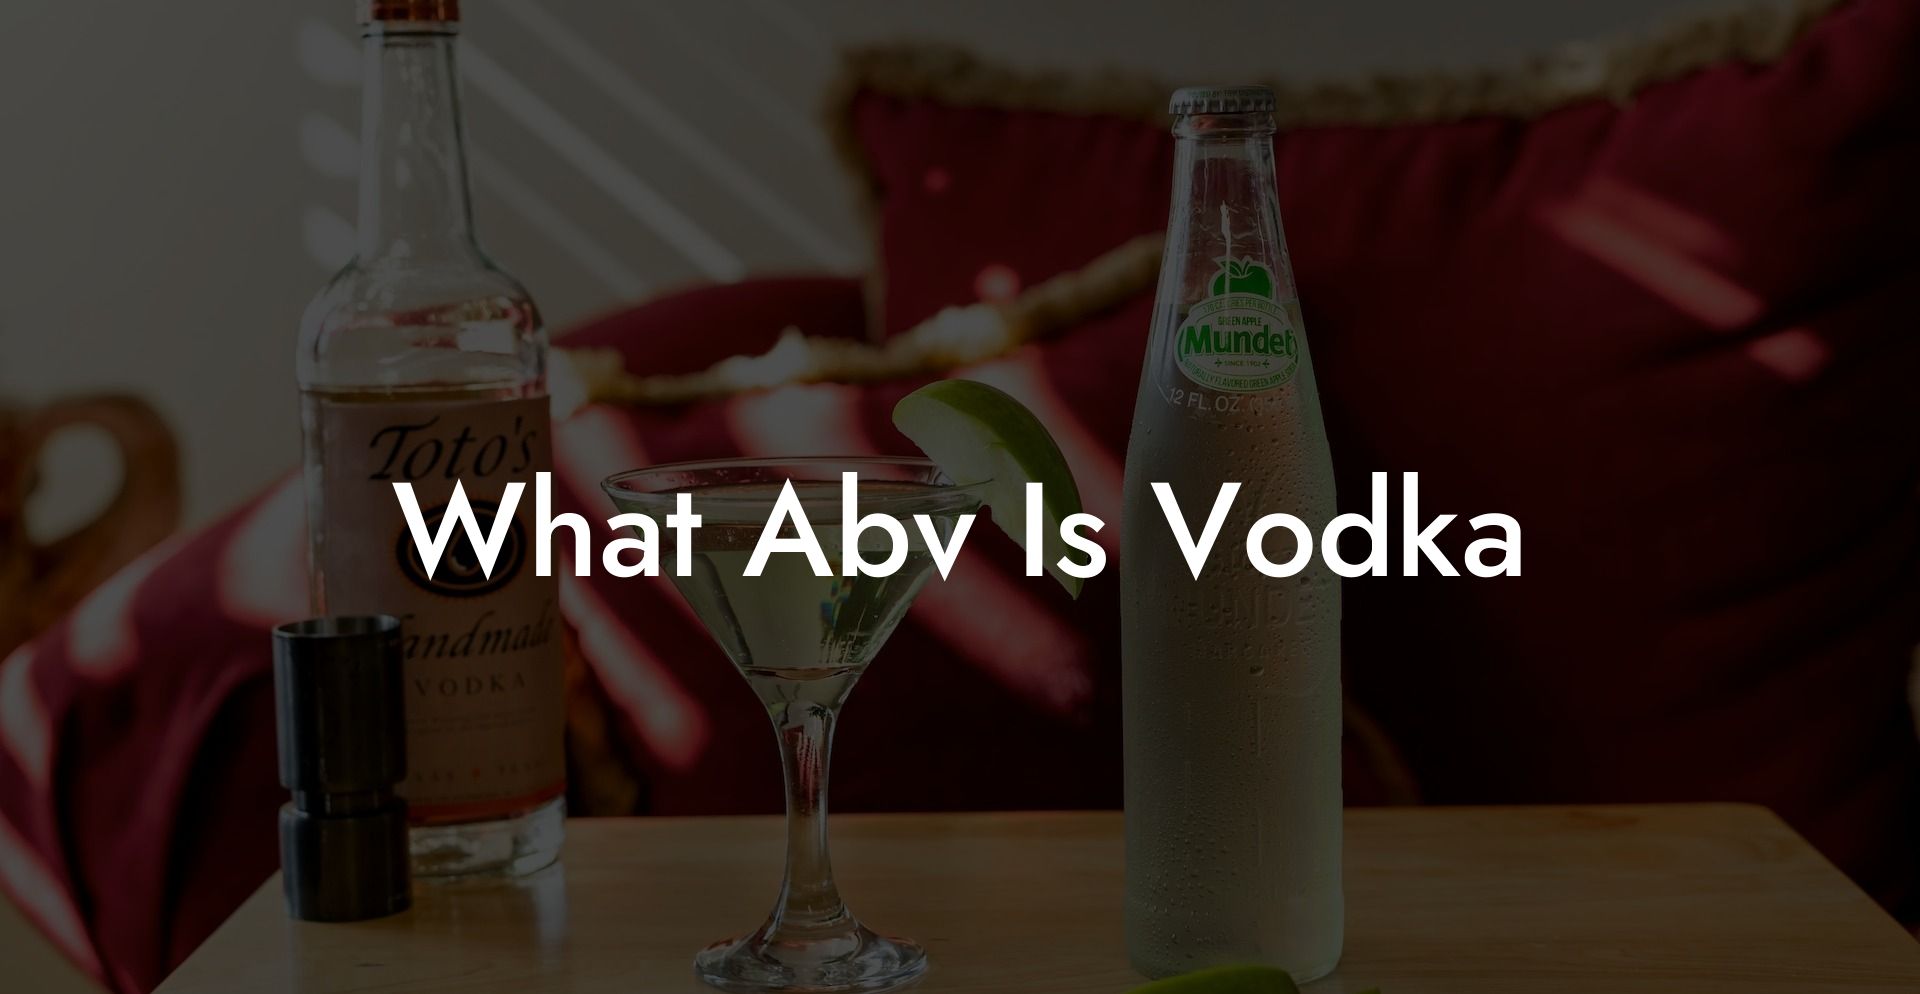 What Abv Is Vodka